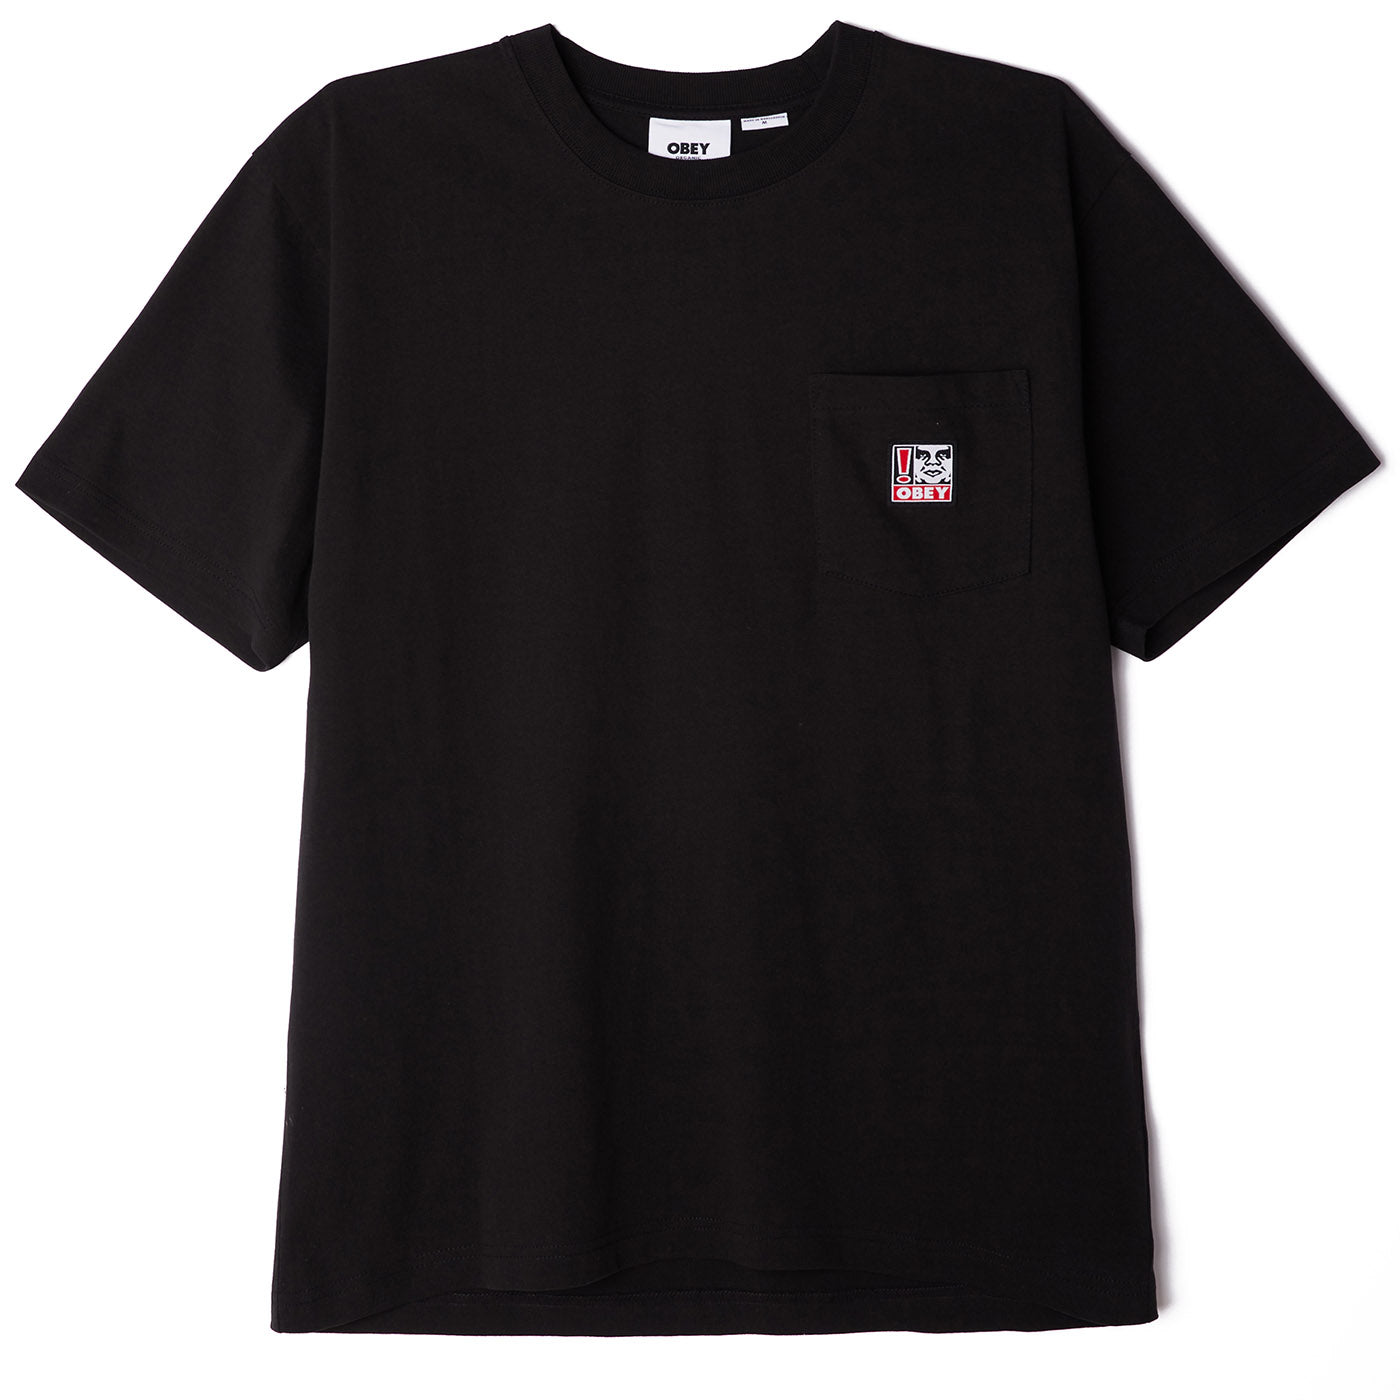 Obey Point Organic Pocket Tee